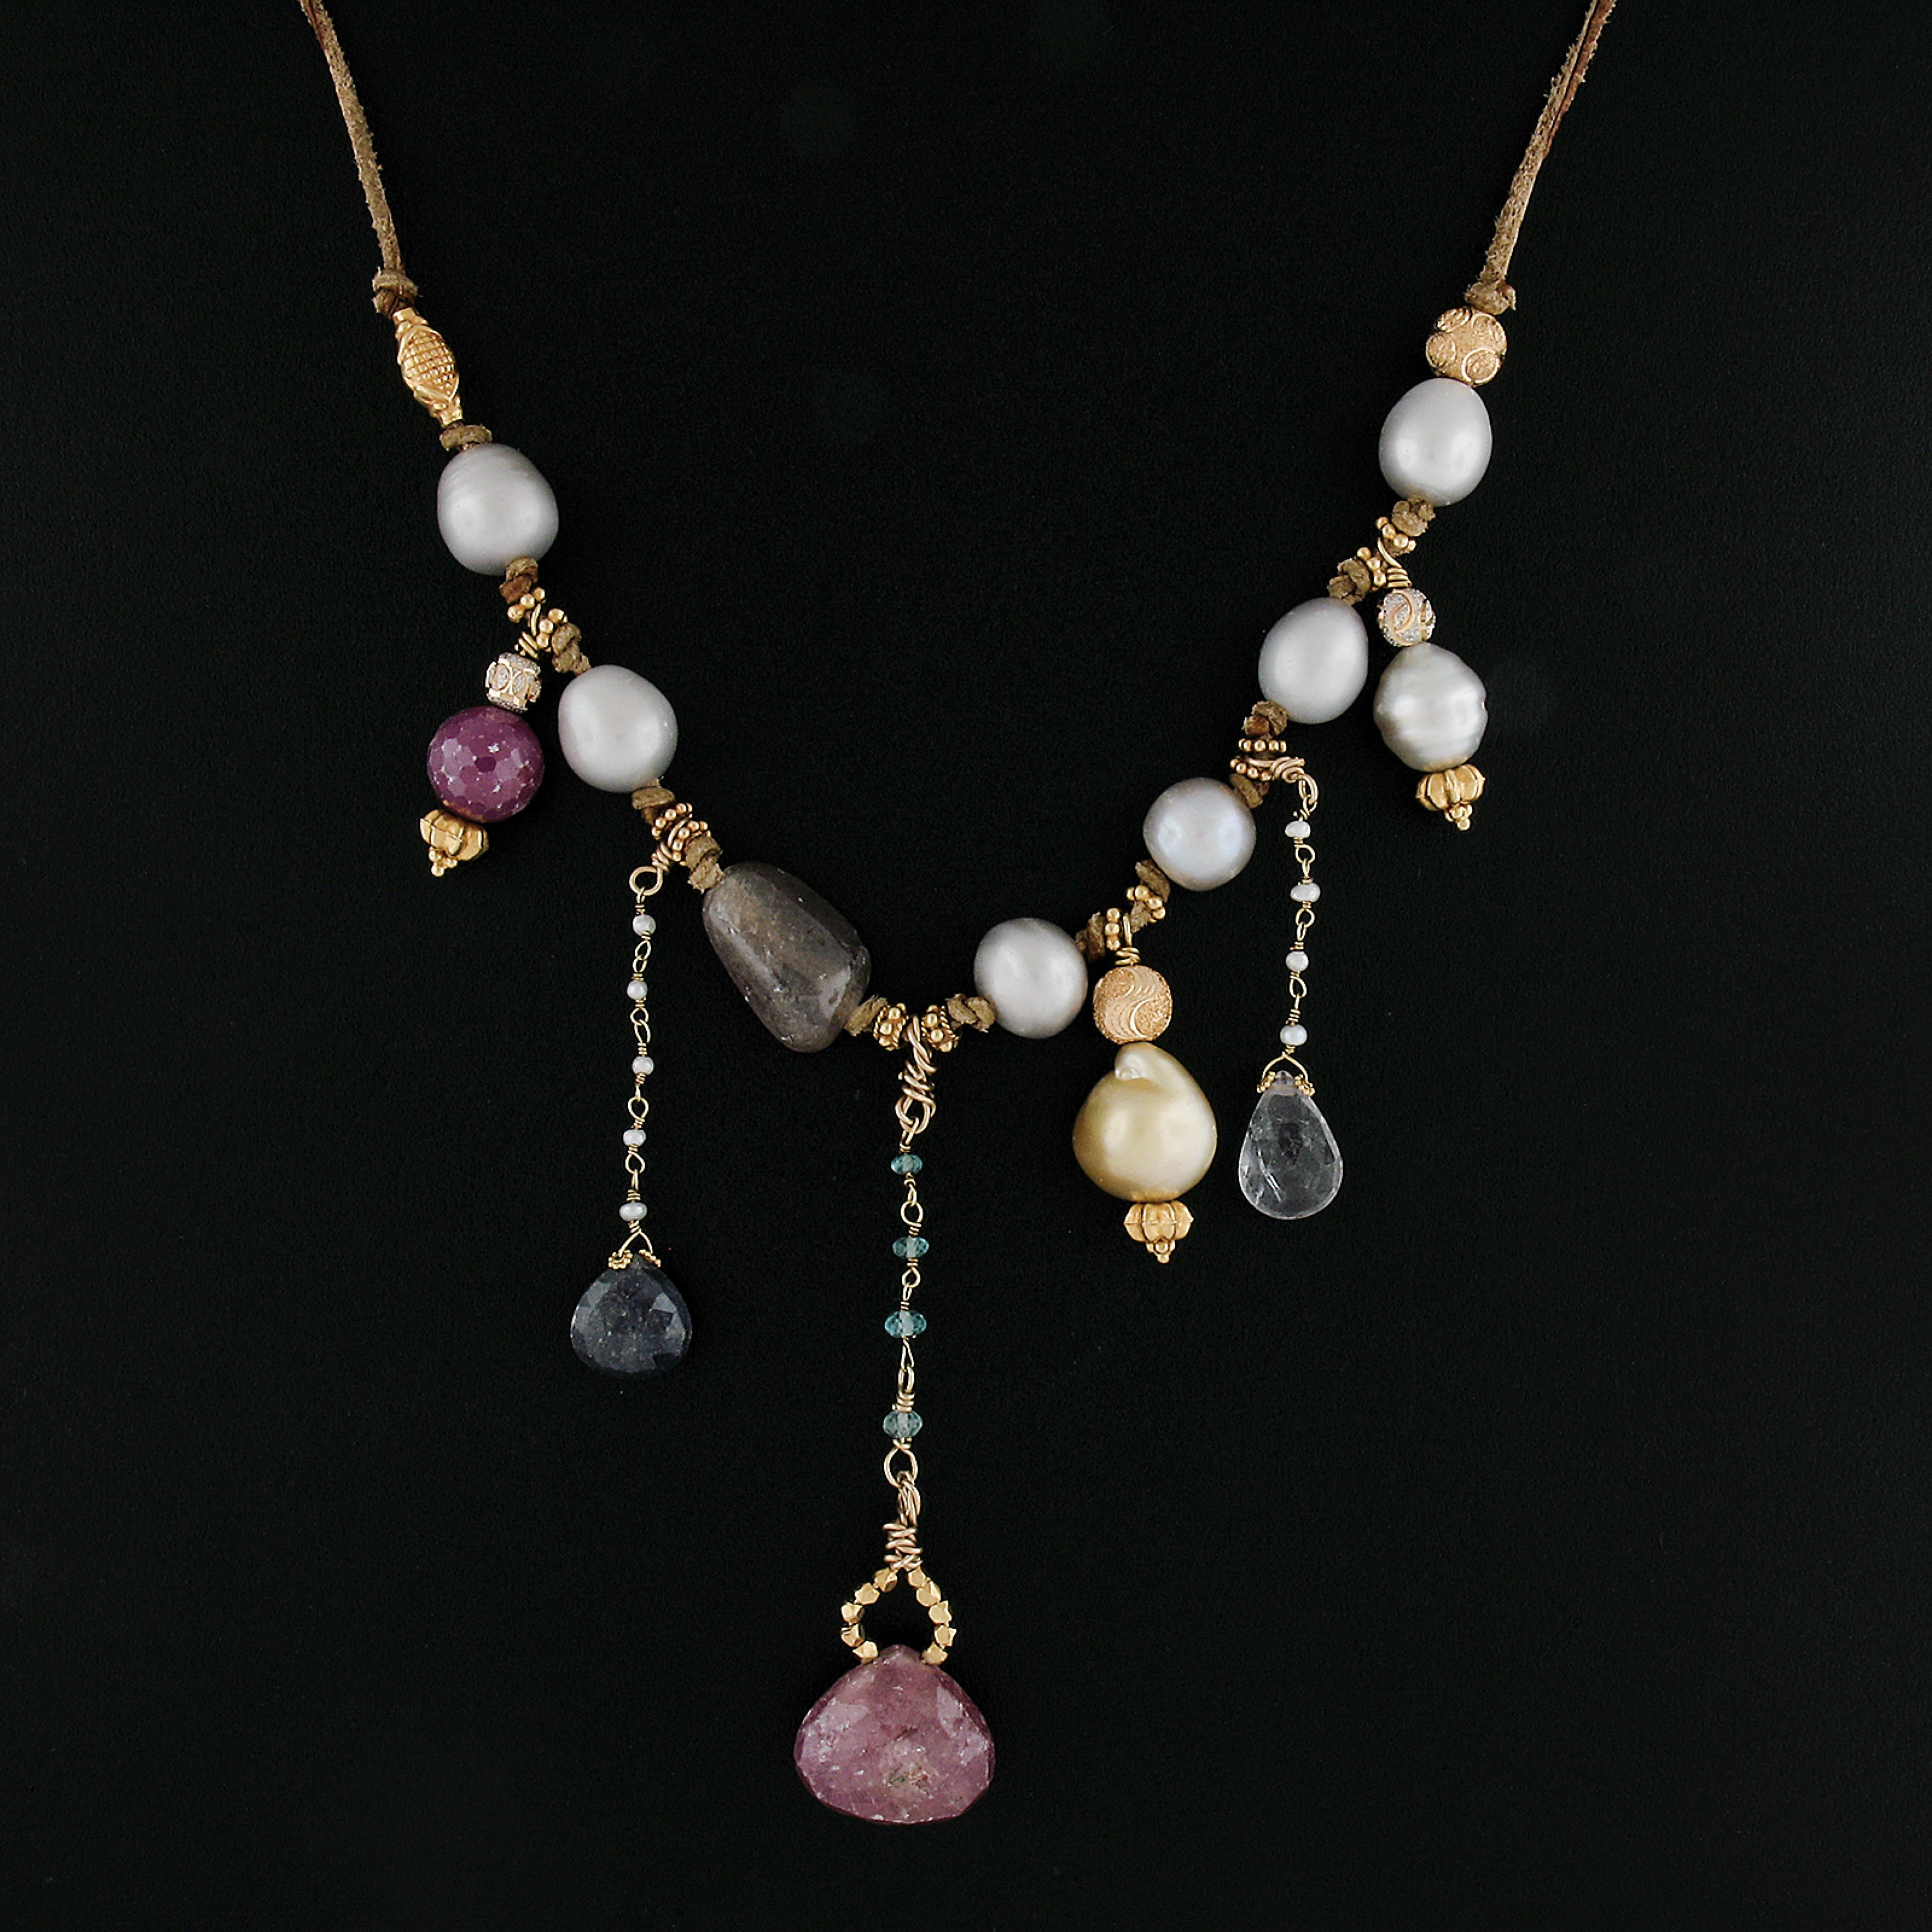 18k Gold Pearl & Multi Natural Stone Dangles from Brown Leather Cord Necklace For Sale 1